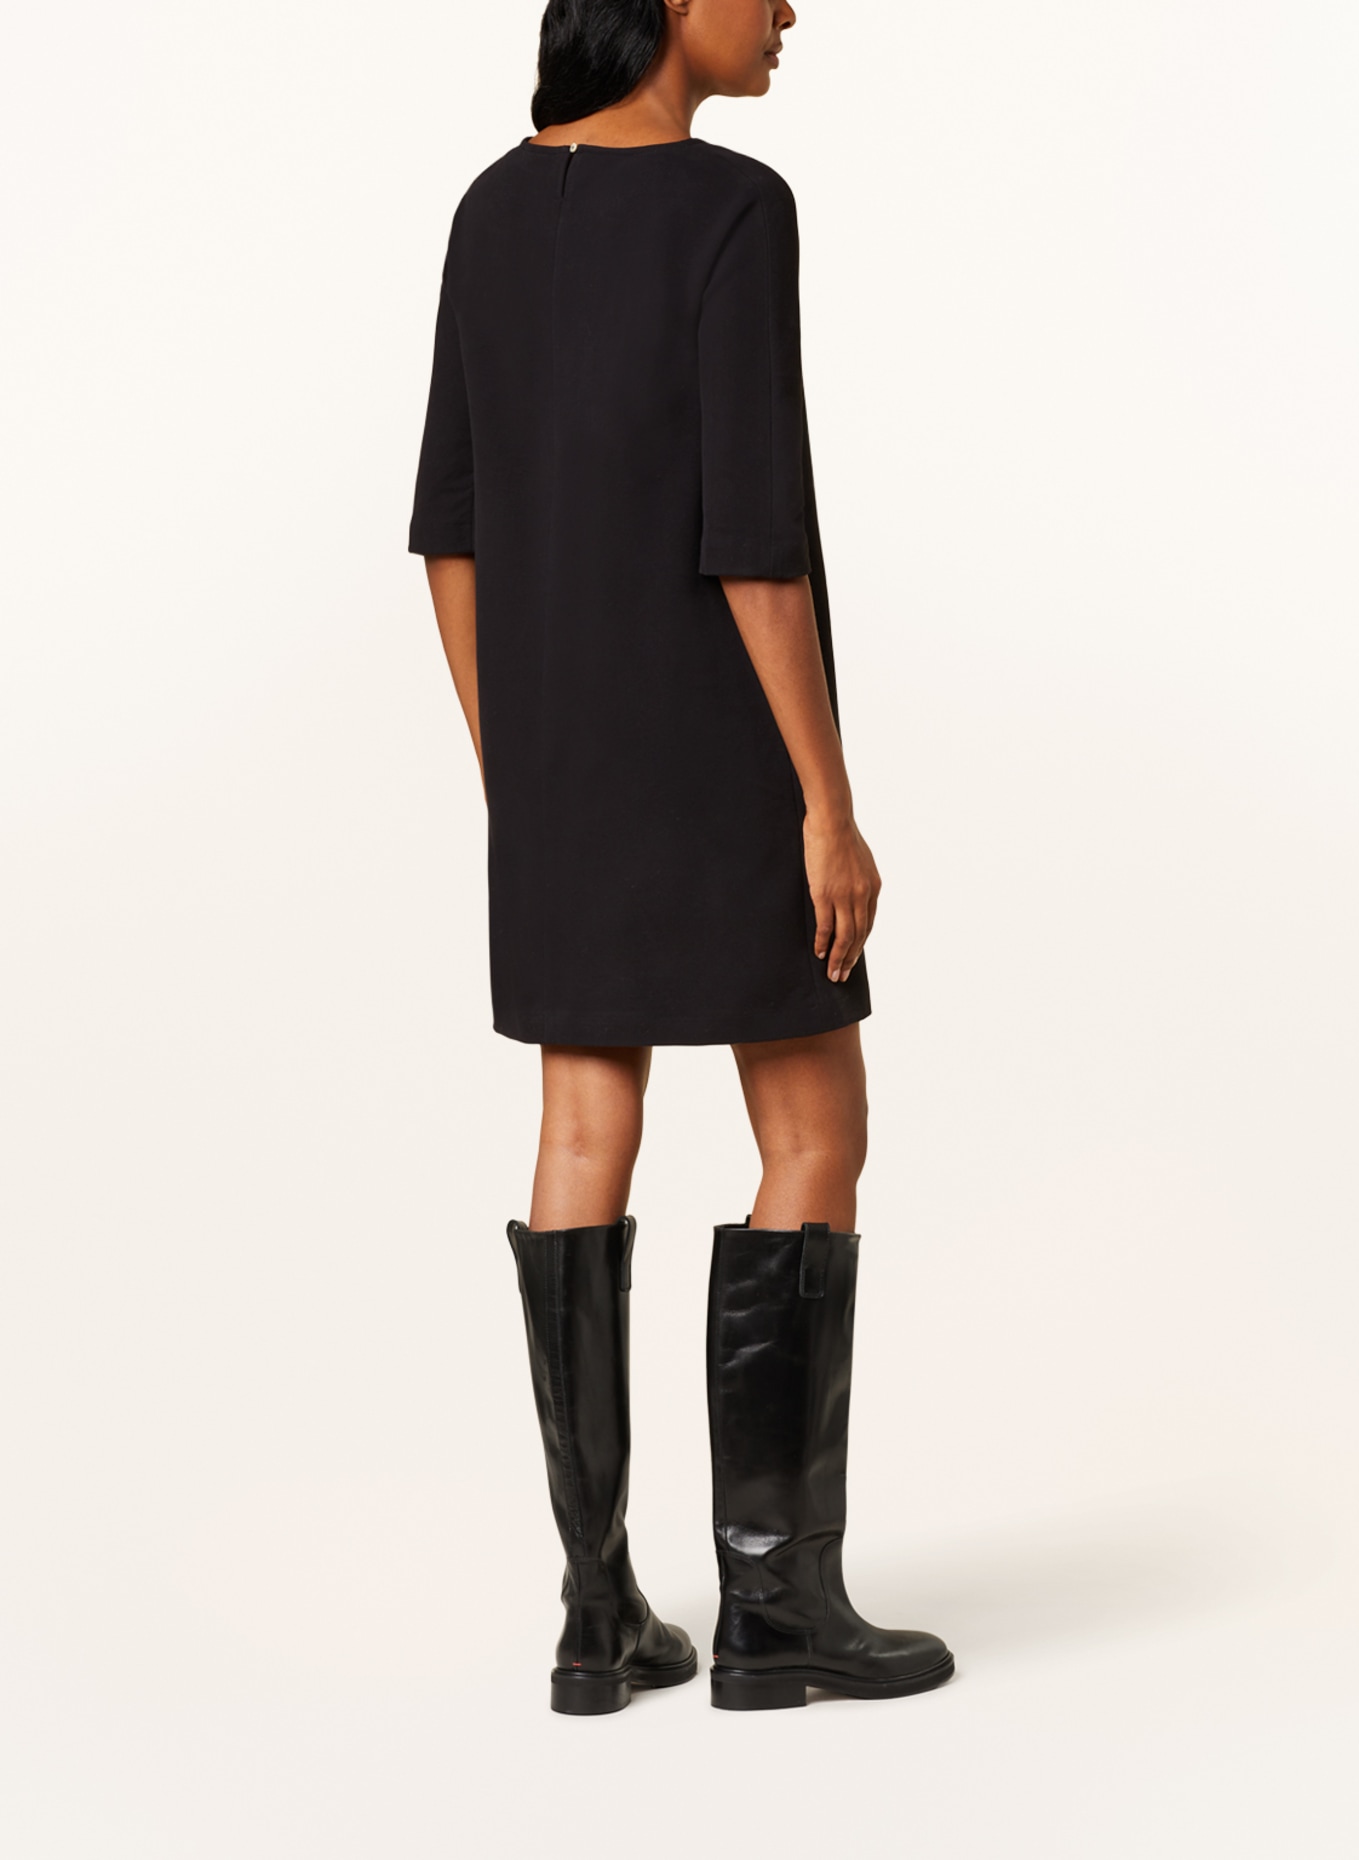 CIRCOLO 1901 Sweater dress with 3/4 sleeves, Color: BLACK (Image 3)